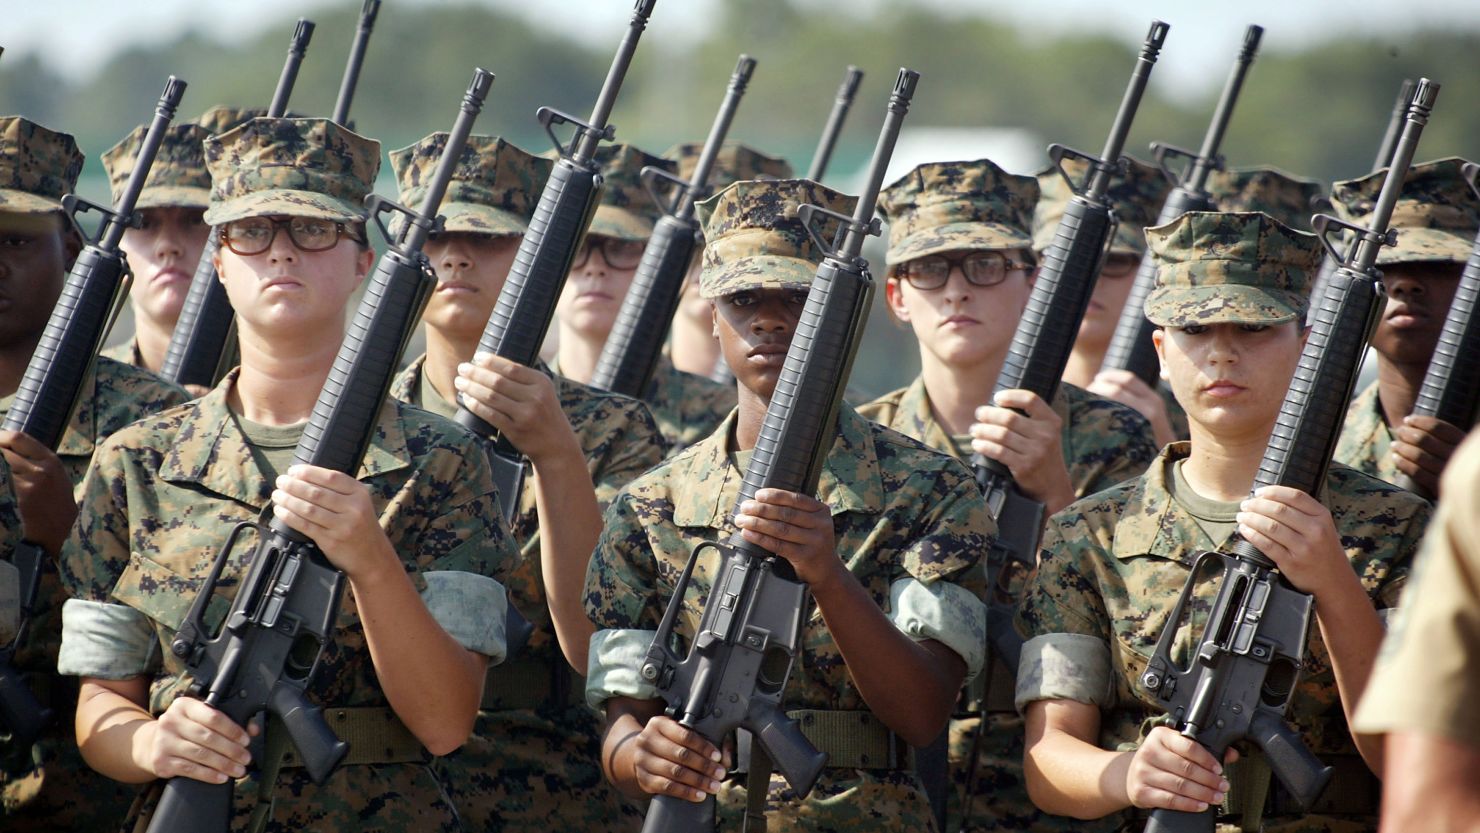 The number of active-duty Marines would drop from 200,000 to 182,000 under the proposed reductions.